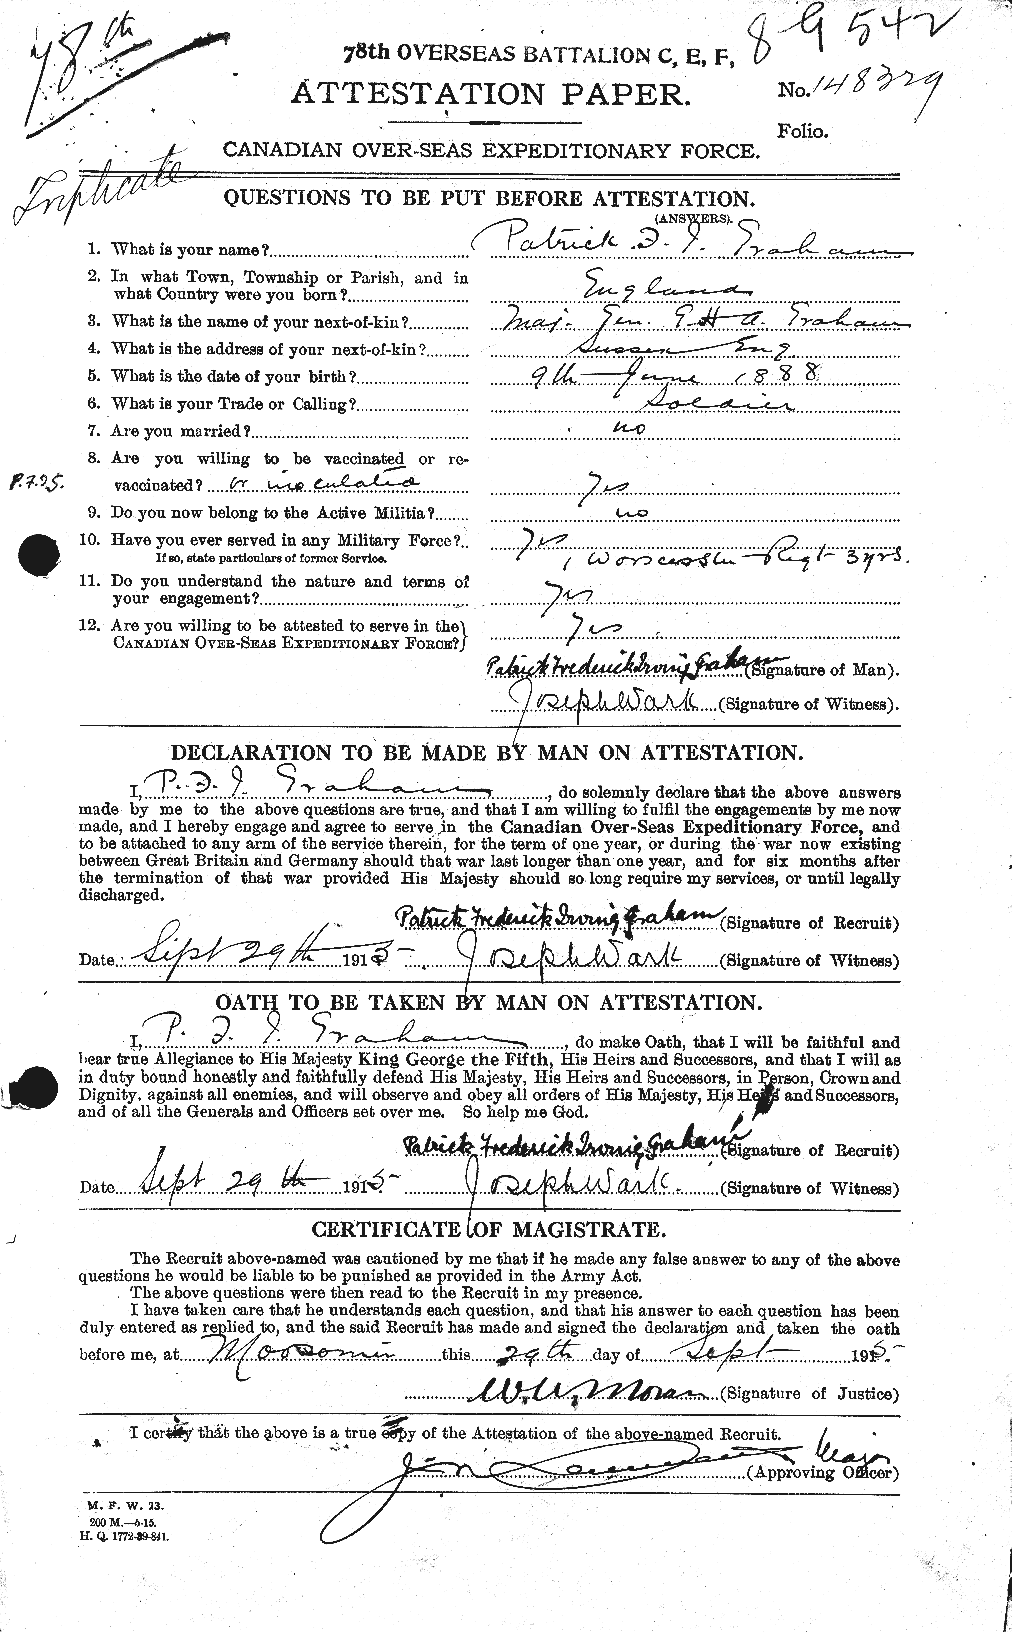 Personnel Records of the First World War - CEF 359334a